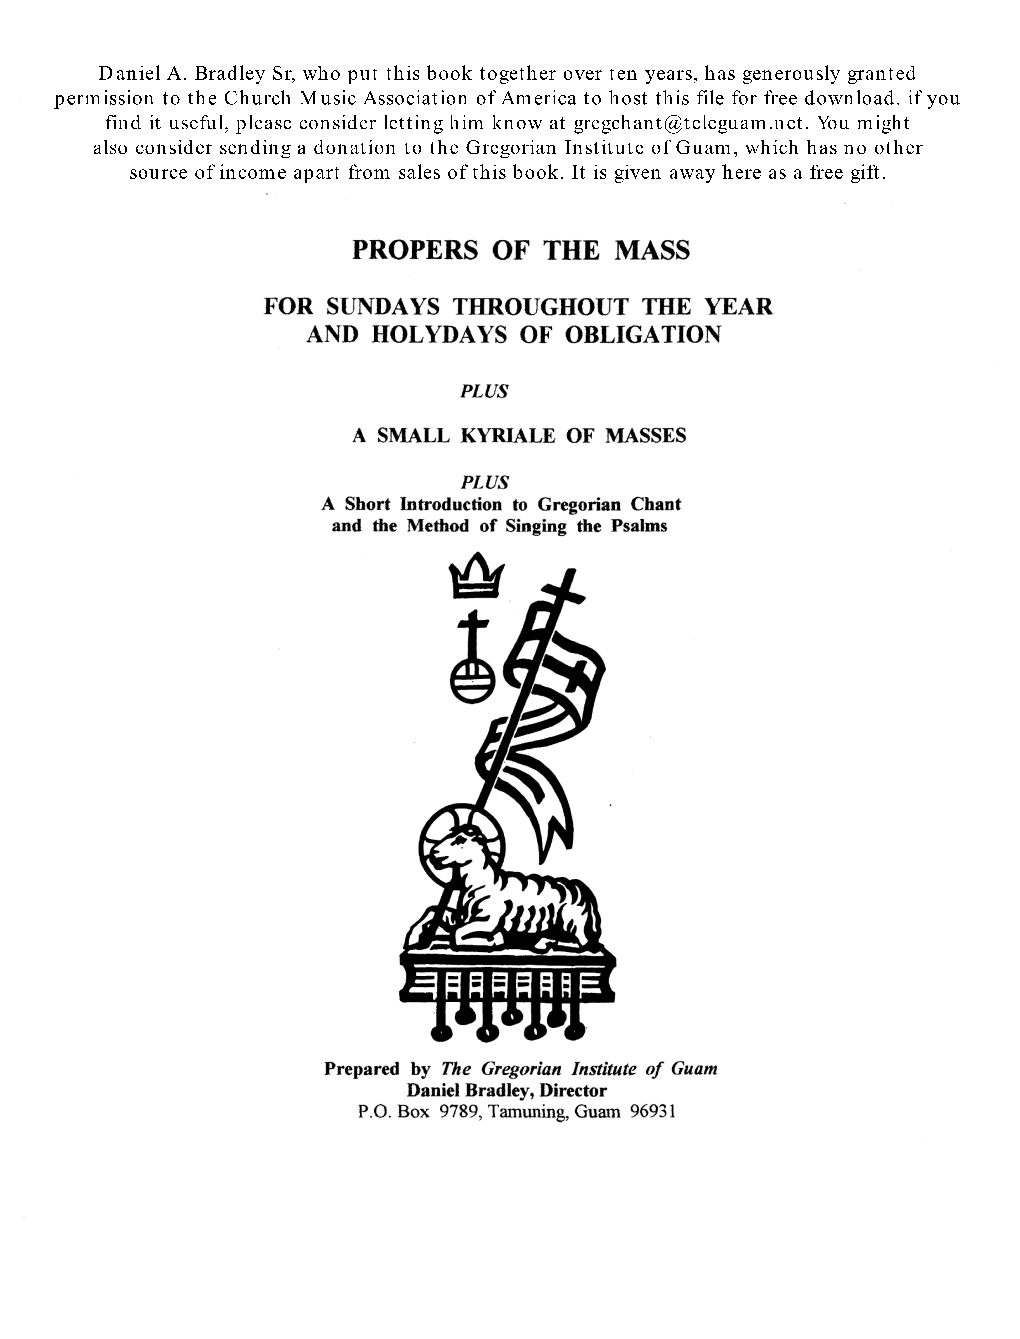 Propers of the Mass Set to Psalm Tones